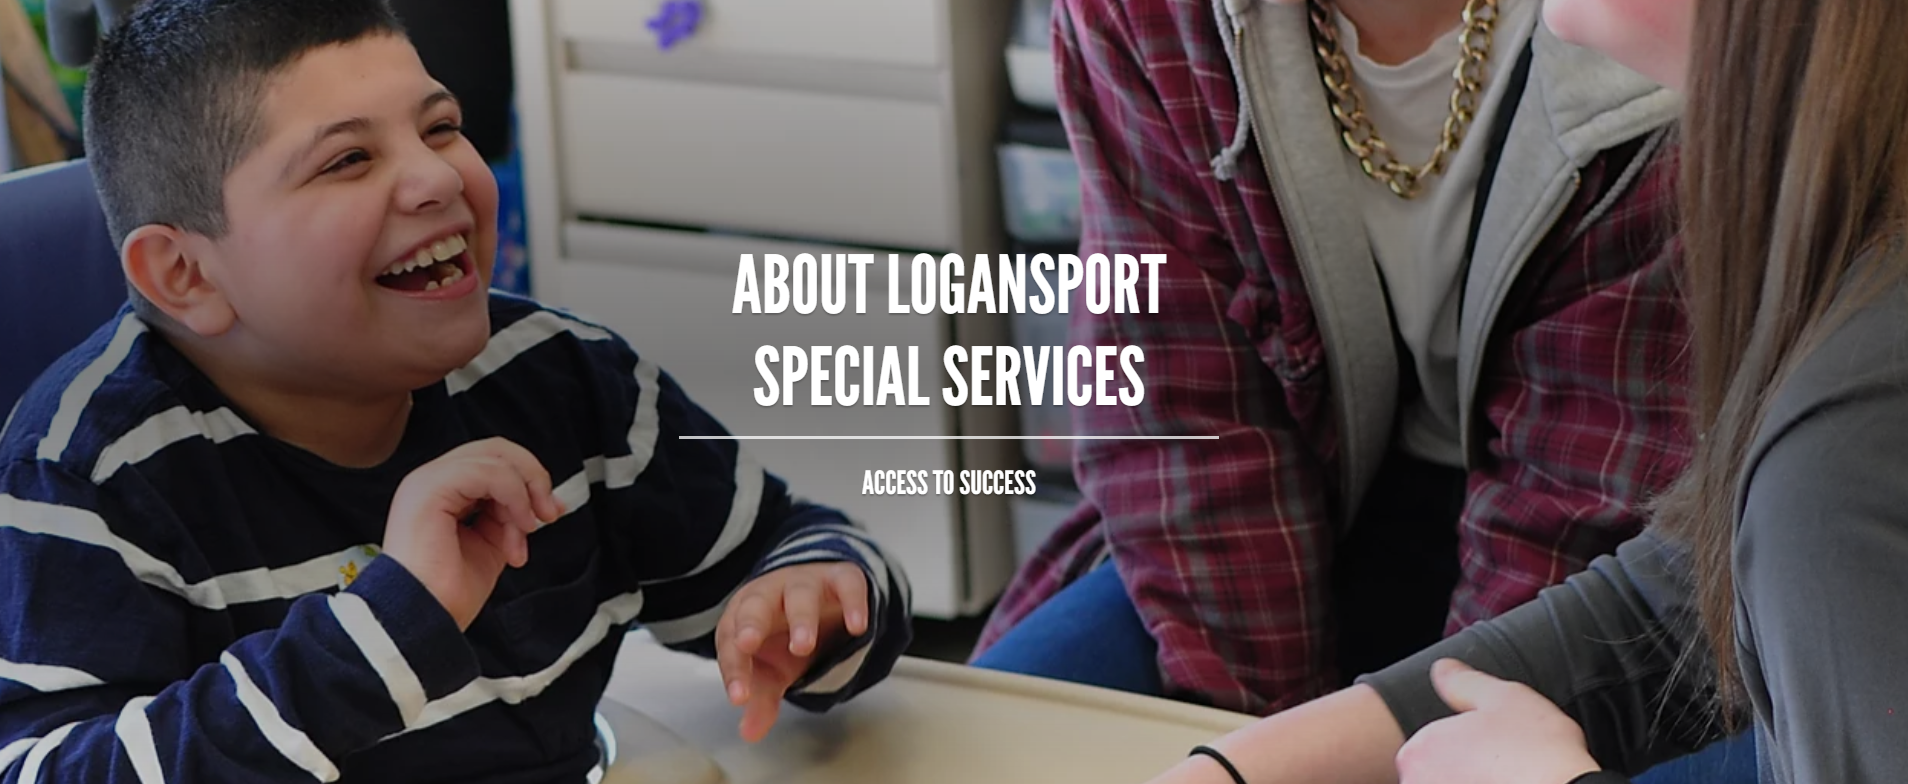 About Logansport Special Services